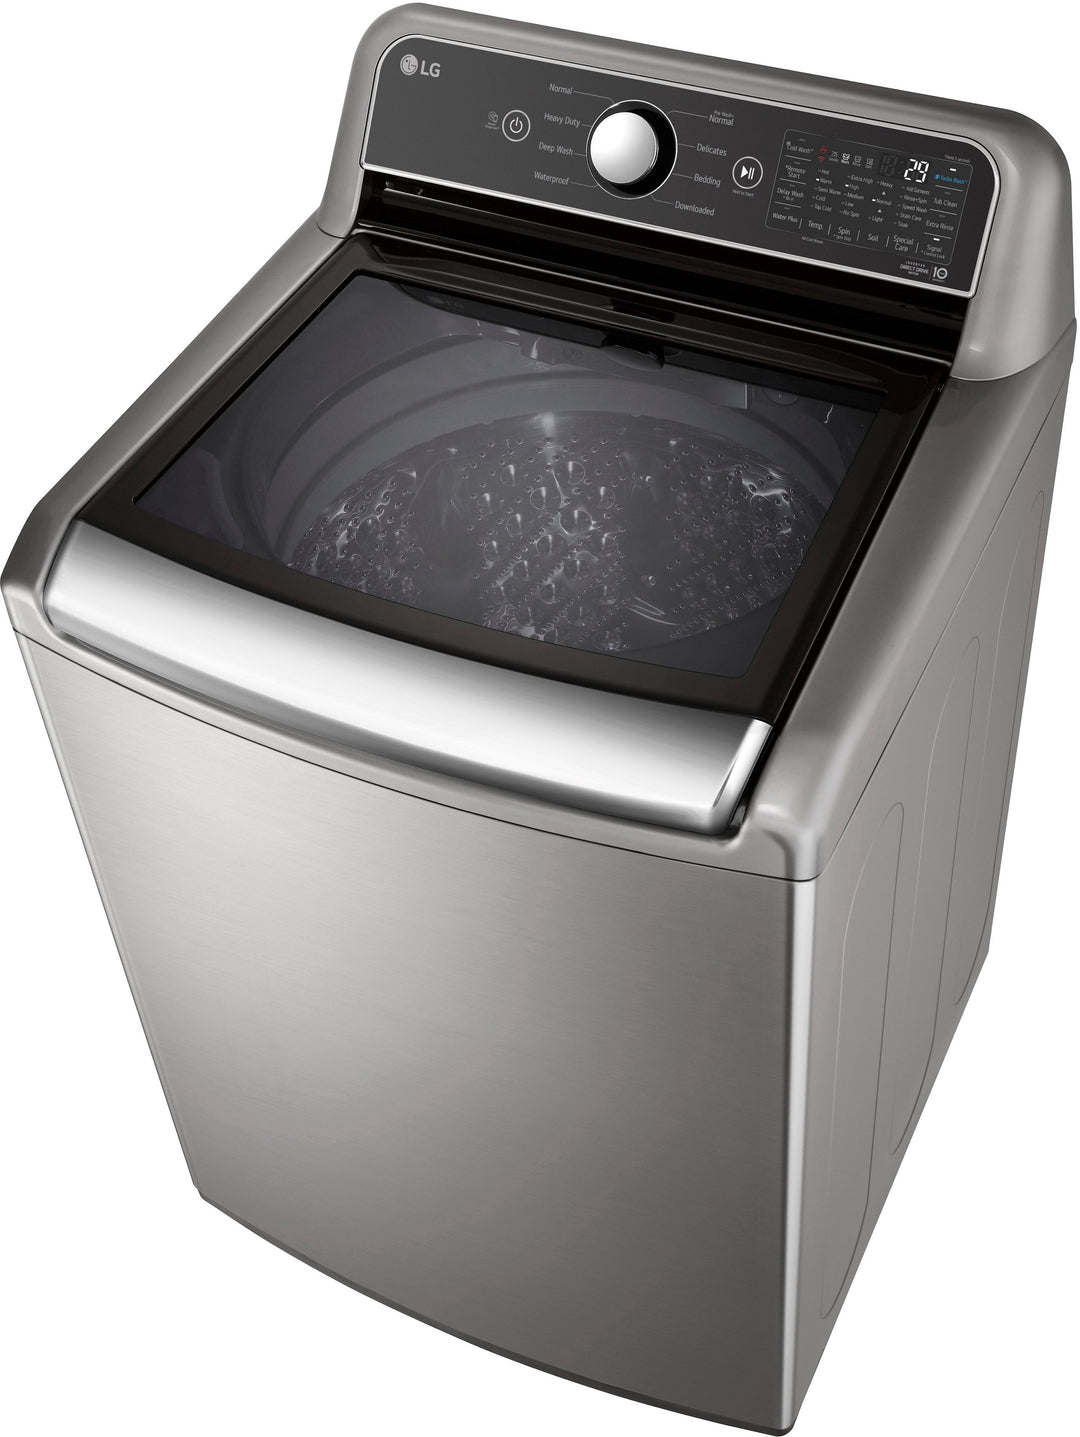 LG - 5.5 Cu. Ft. Smart Top Load Washer with TurboWash3D - Graphite steel_9